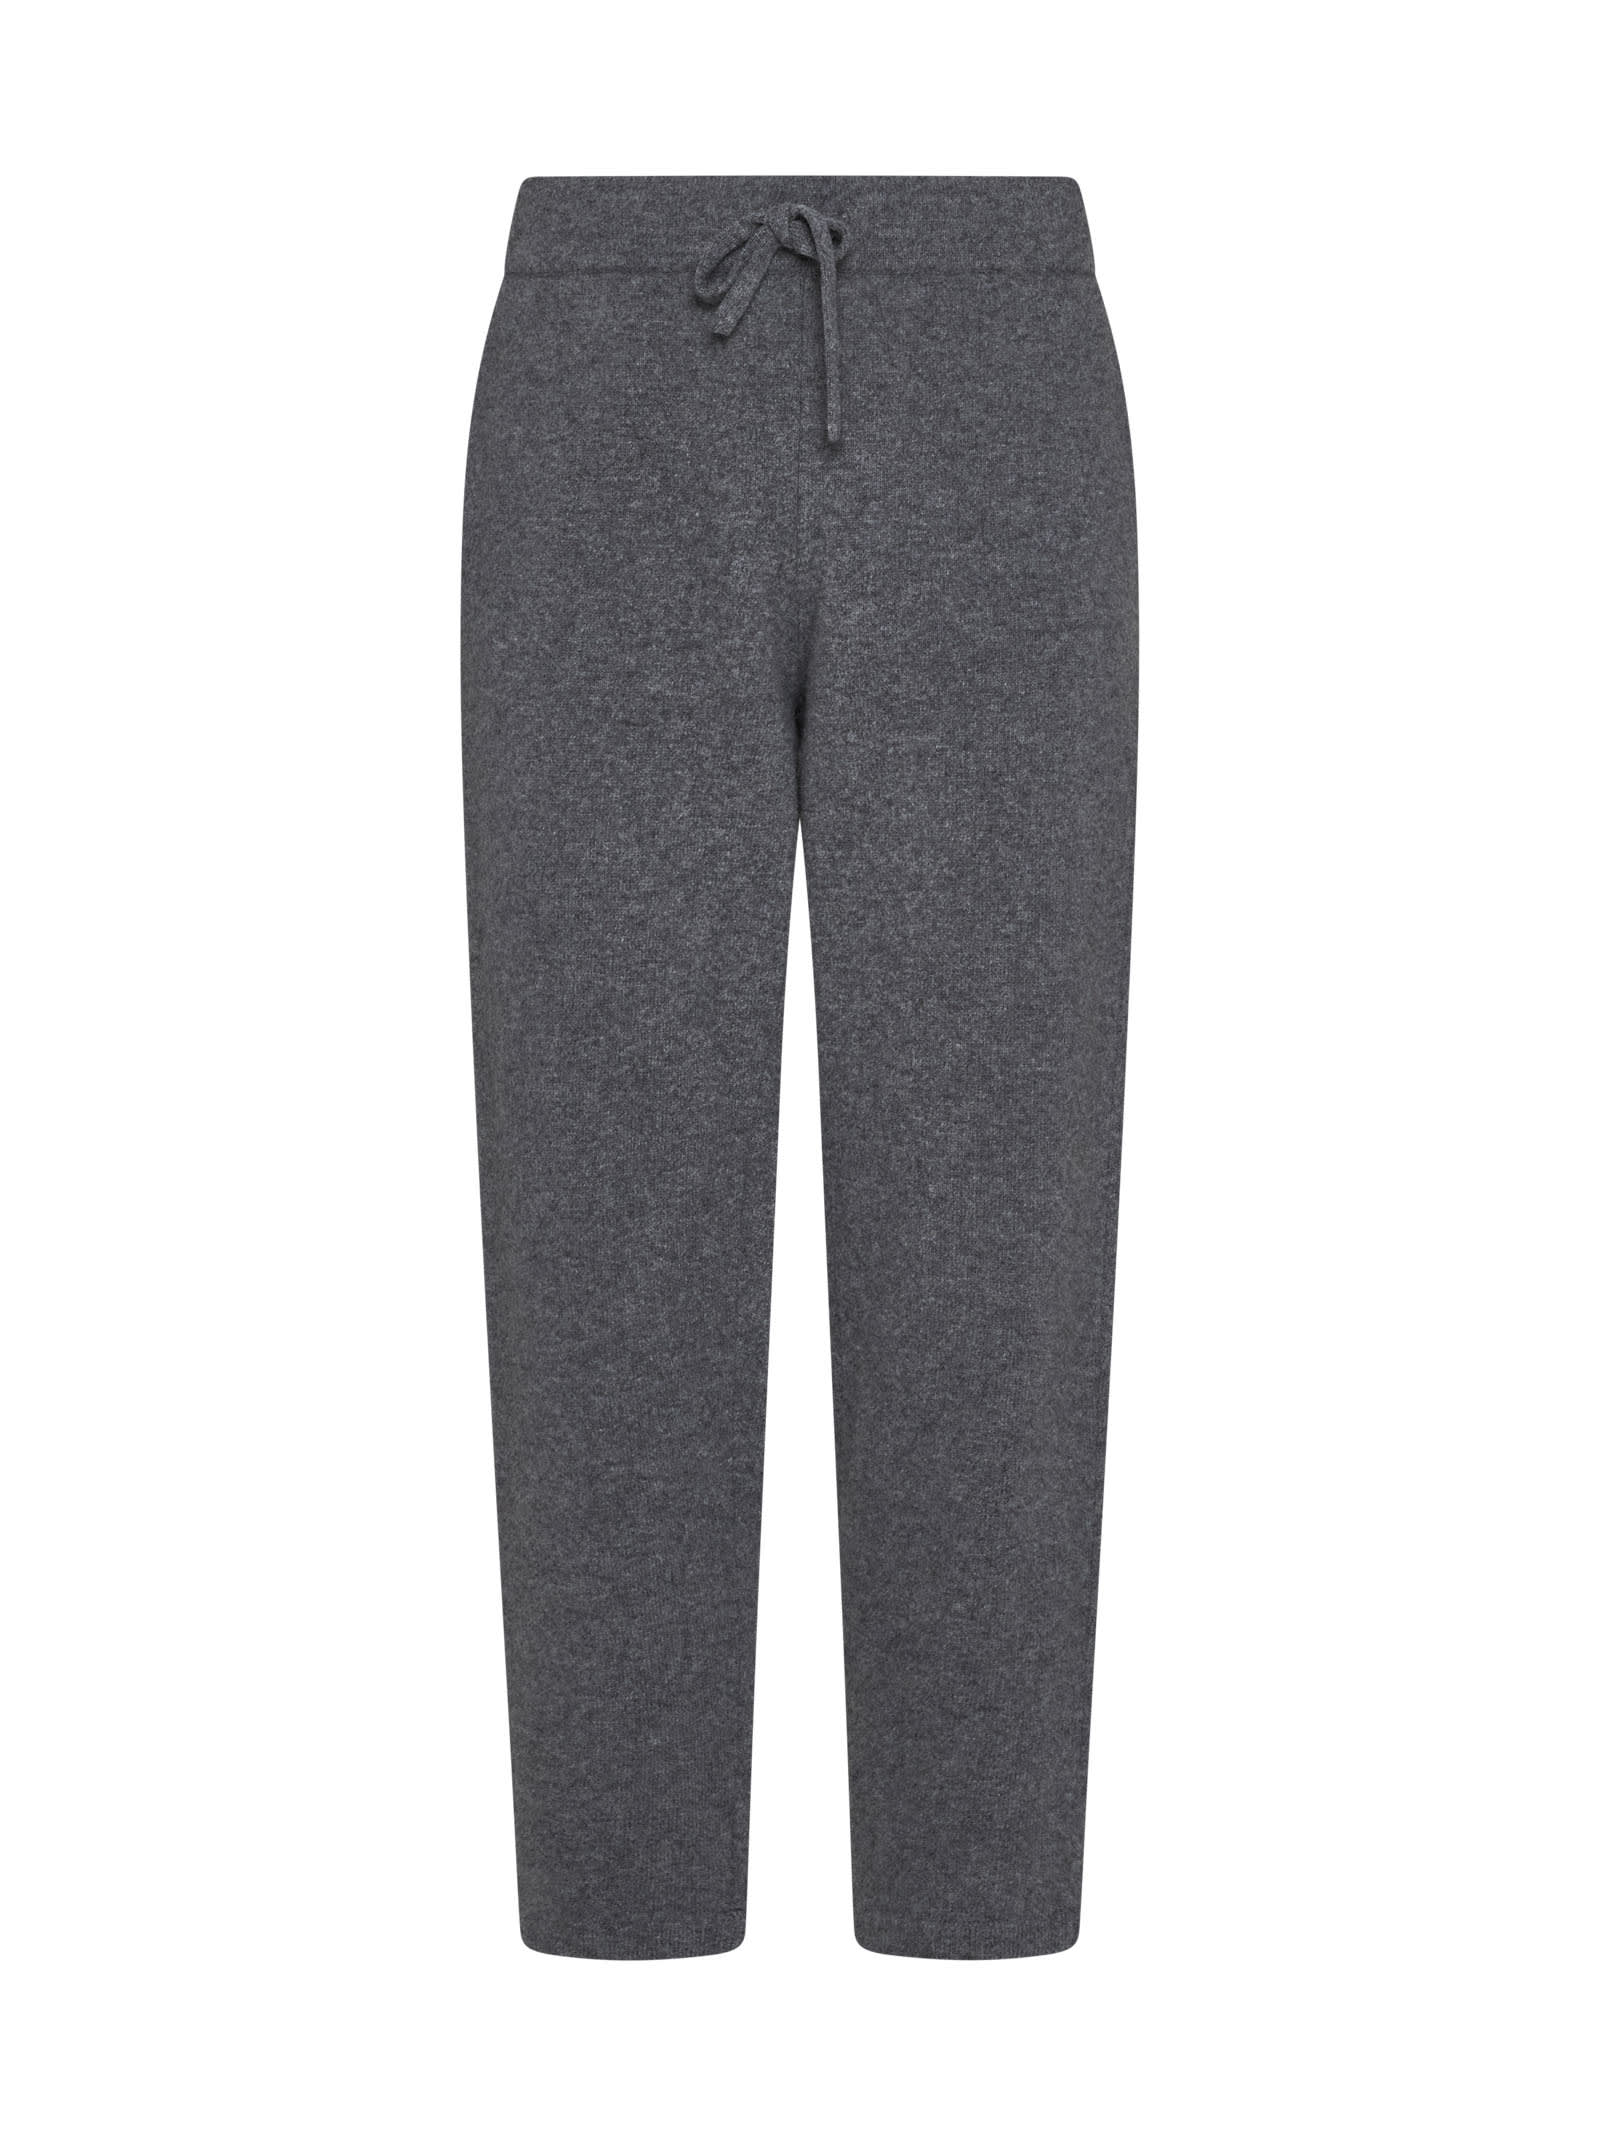 dressing gownRTO COLLINA trousers